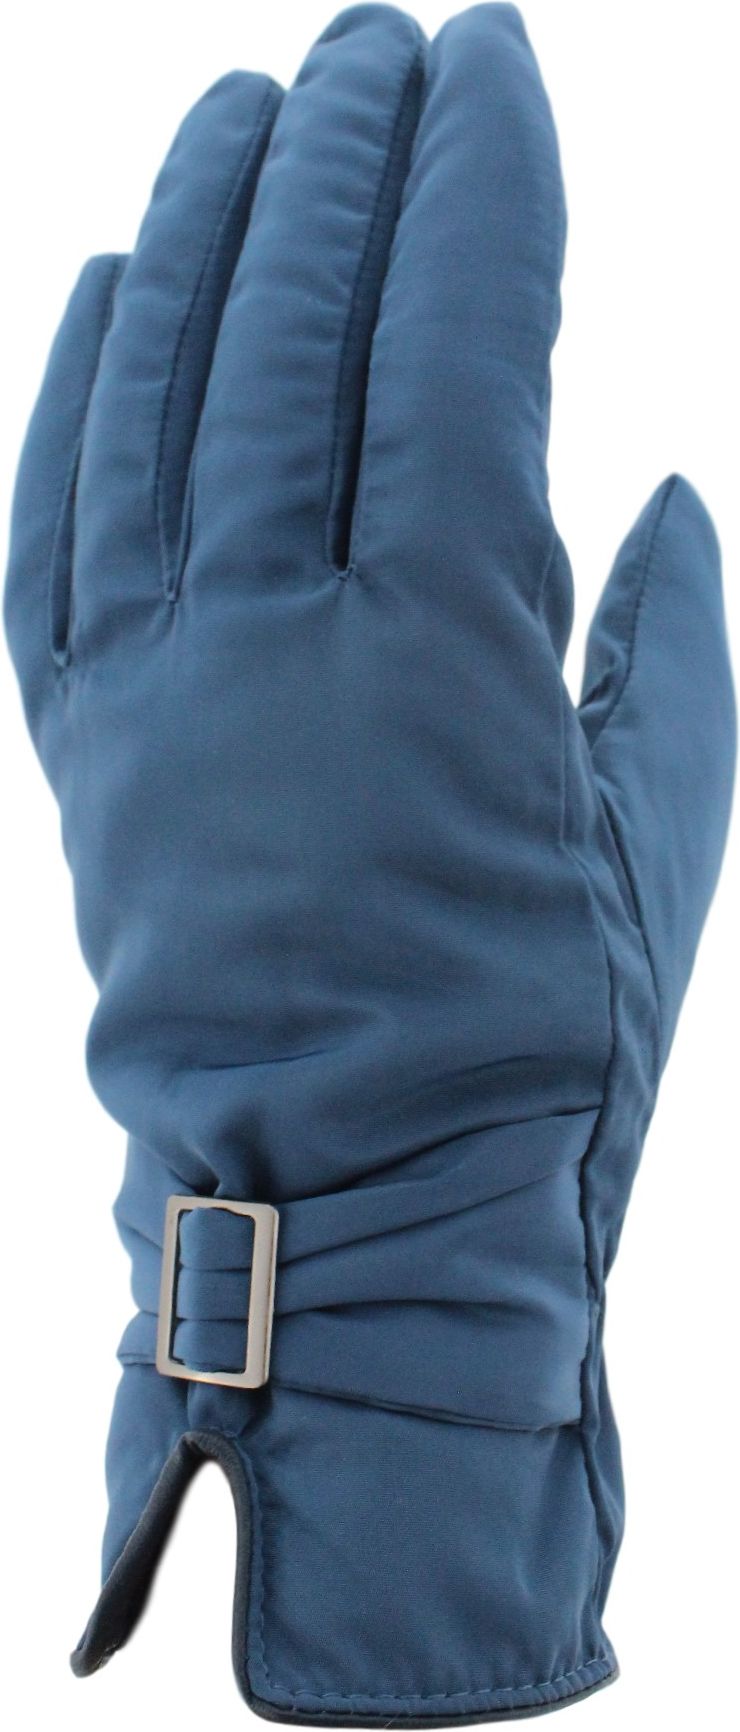 Sterling Glove Accessories Nylon Glove With Fiberfill And Buckle Blue